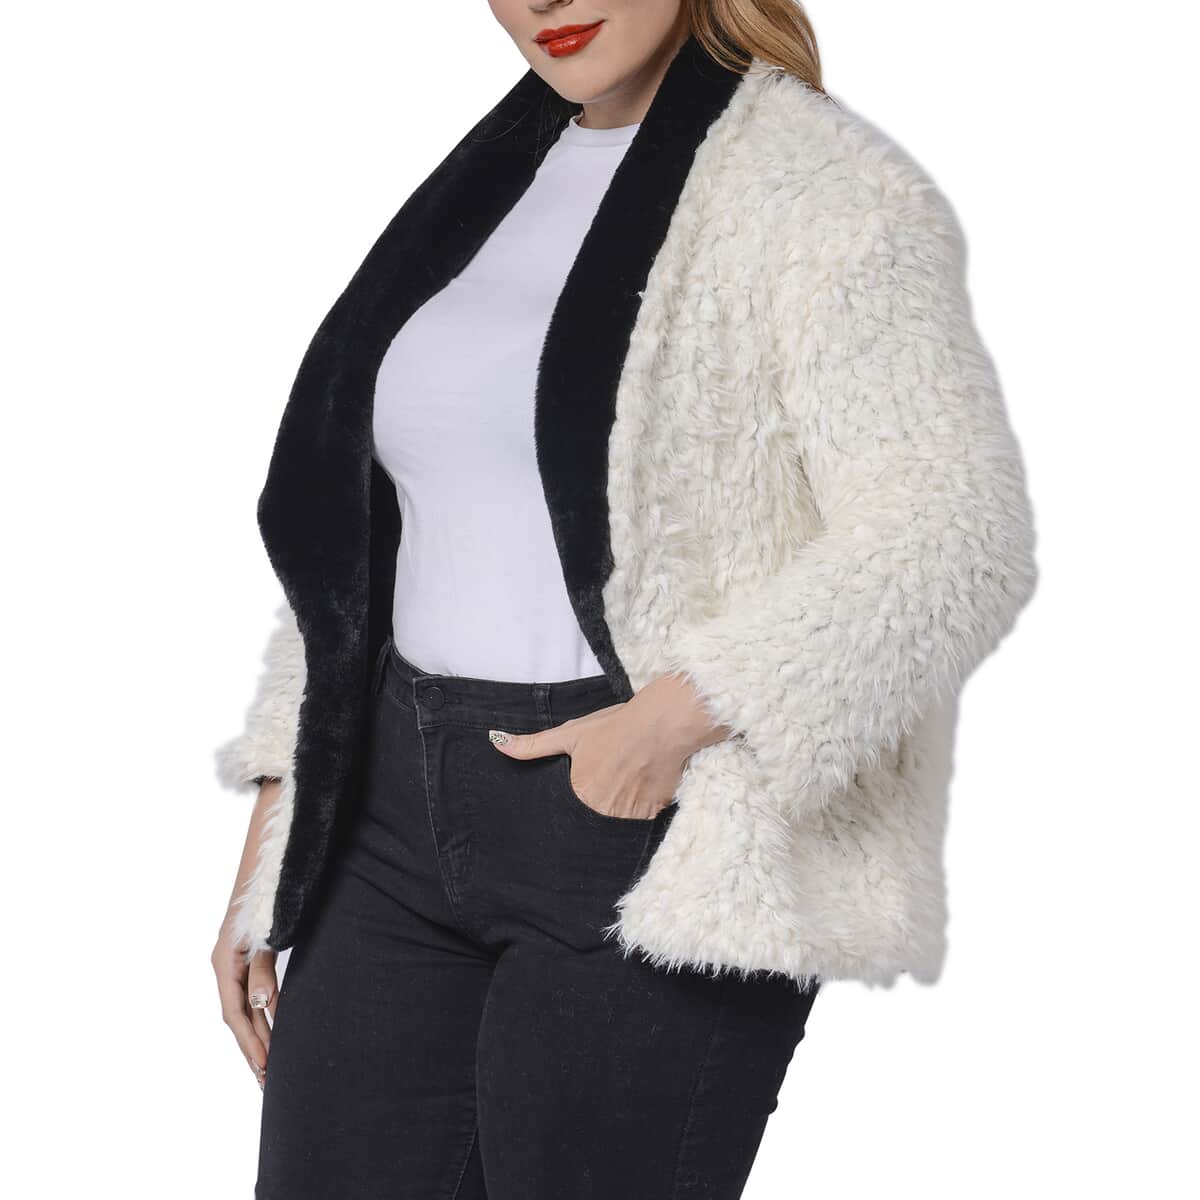 PASSAGE Black And White Reversible Womens Coat With Shawl Collar And Long Sleeves (M, 100% Polyester) image number 5